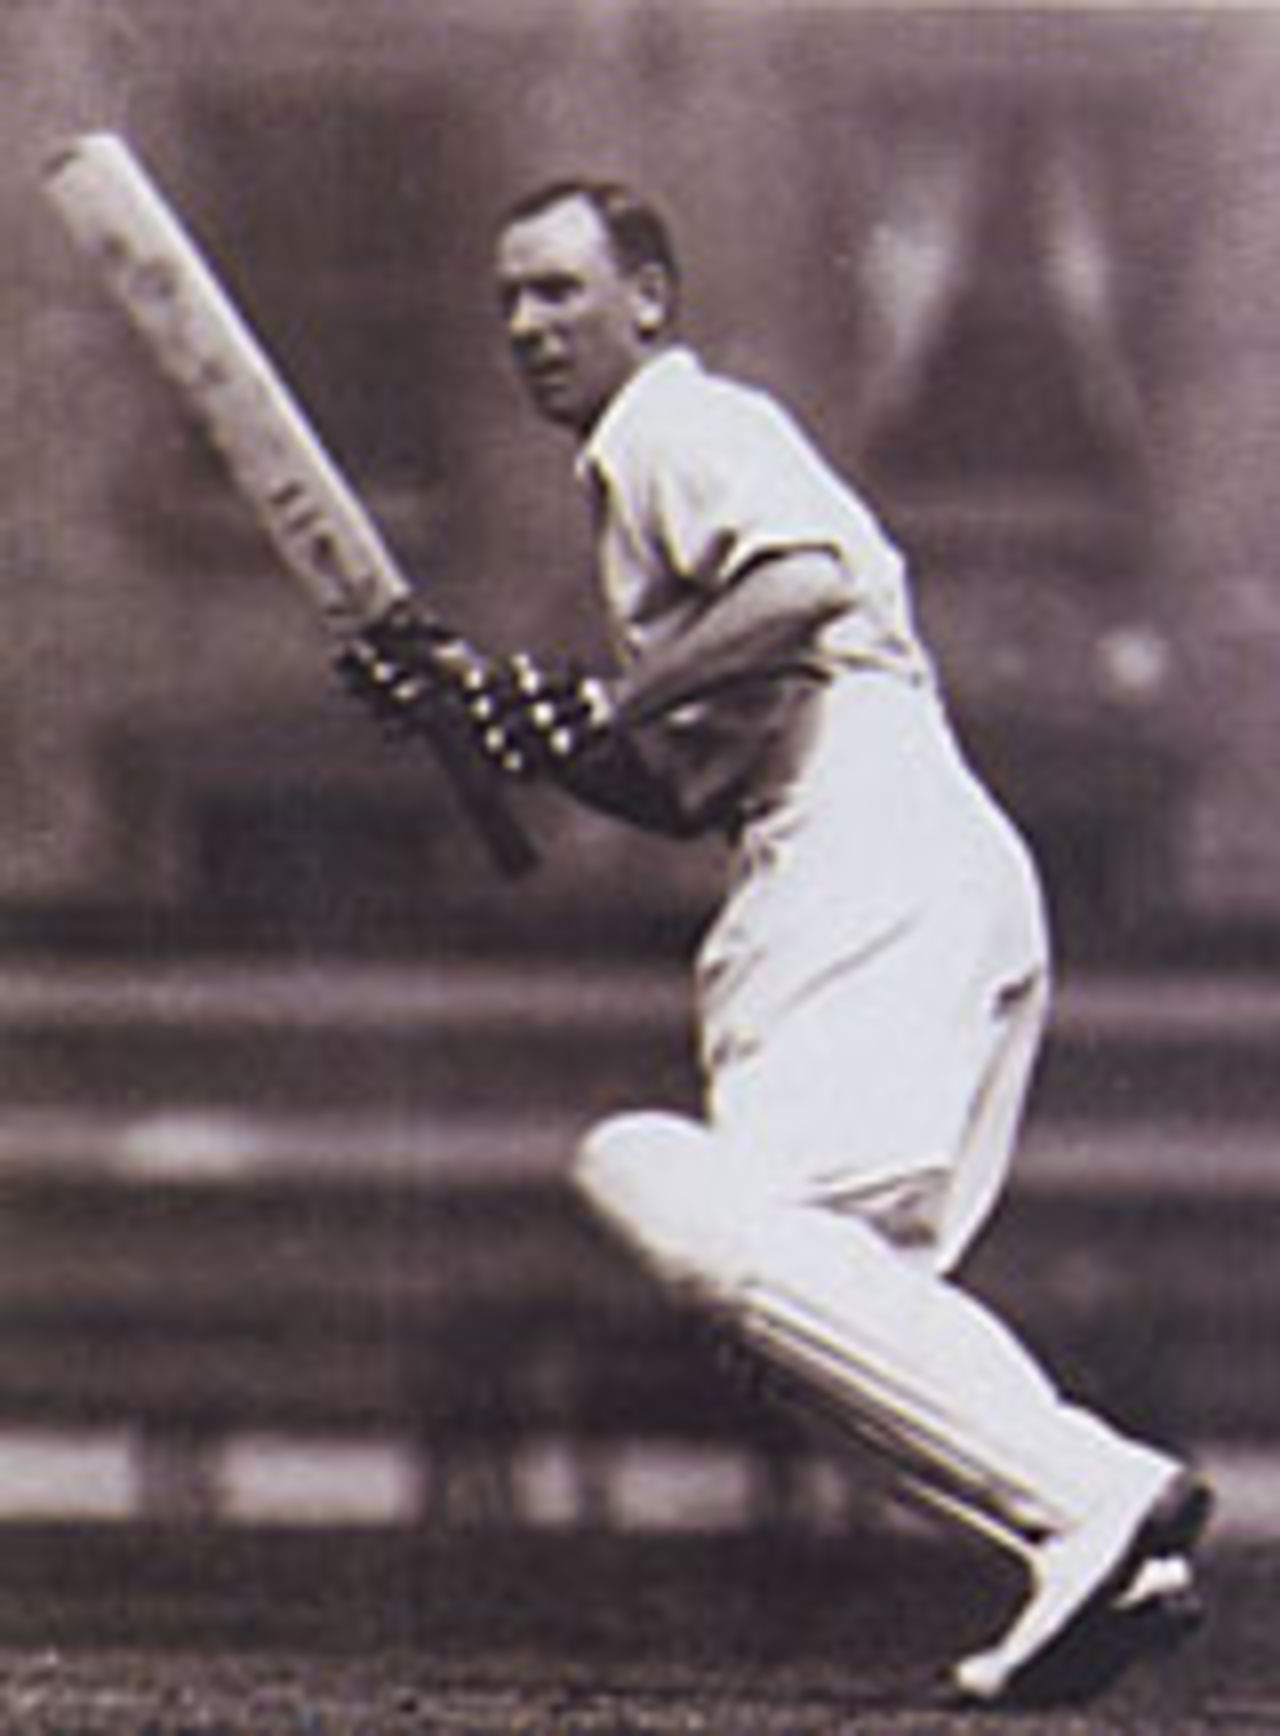 Jack Hobbs batting at The Oval